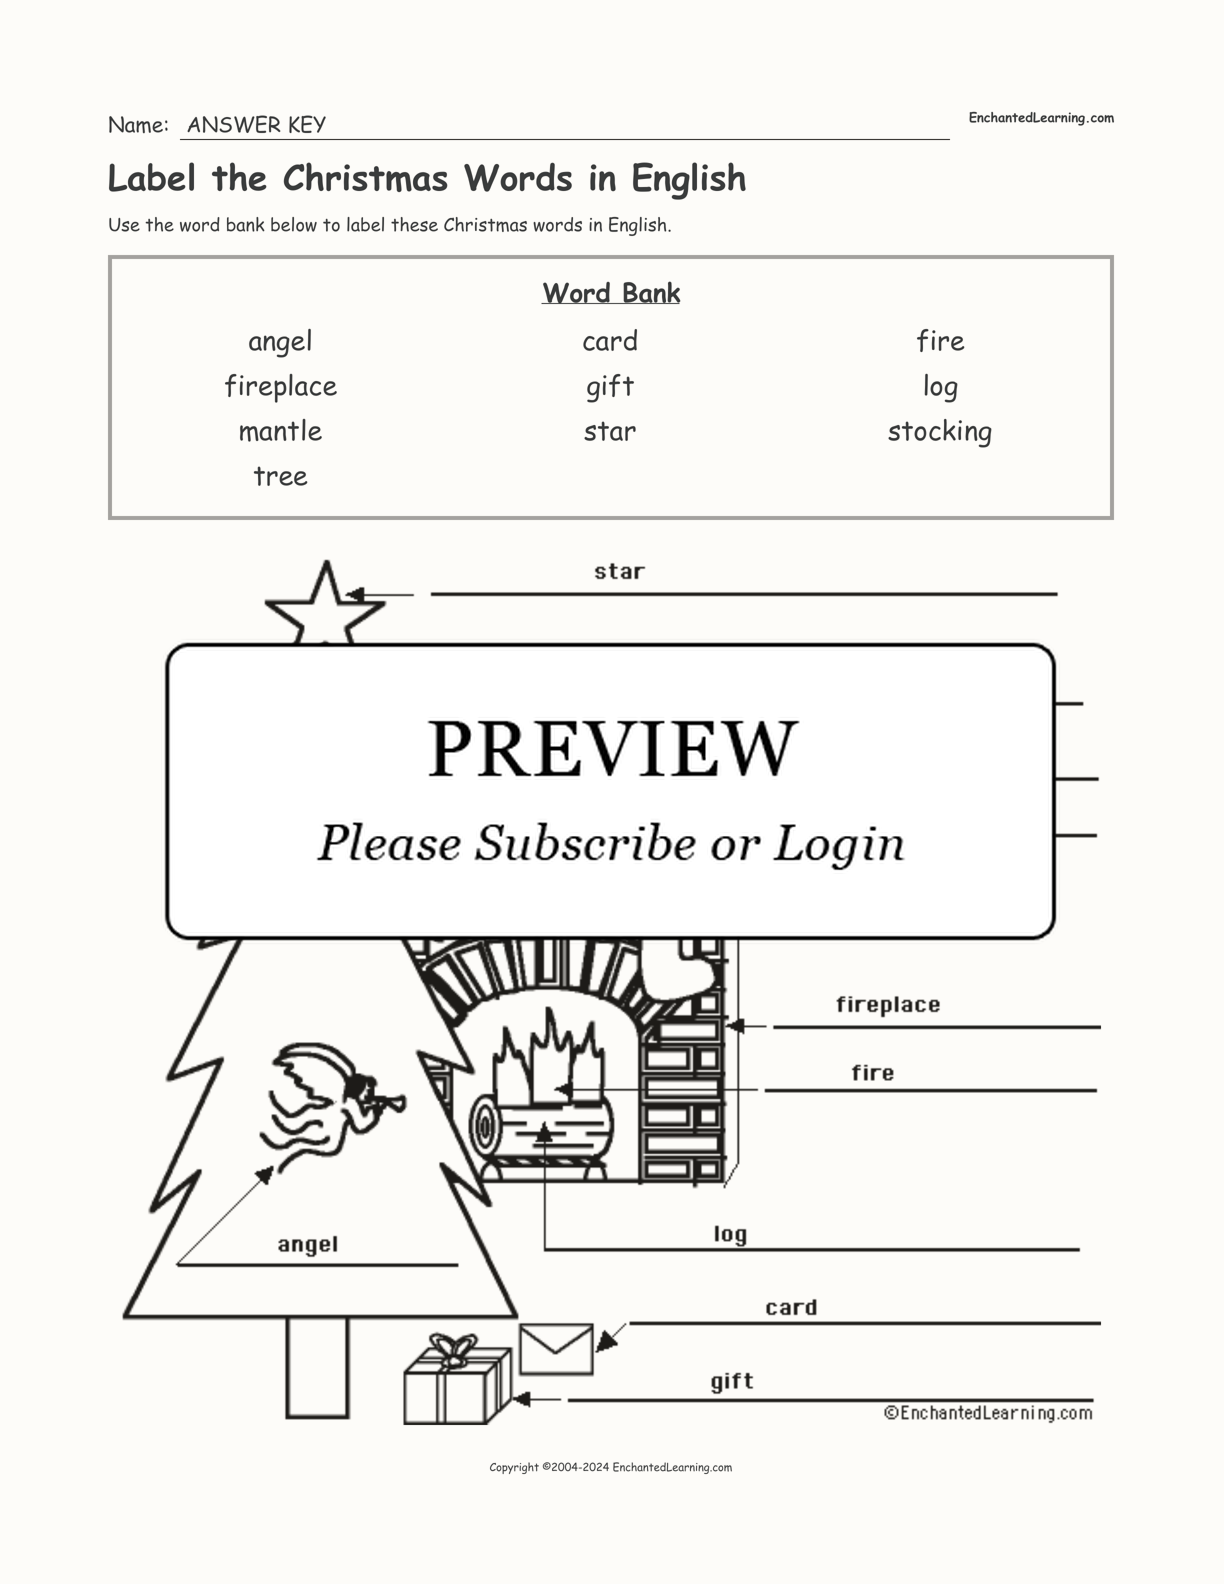 Label the Christmas Words in English interactive worksheet page 2